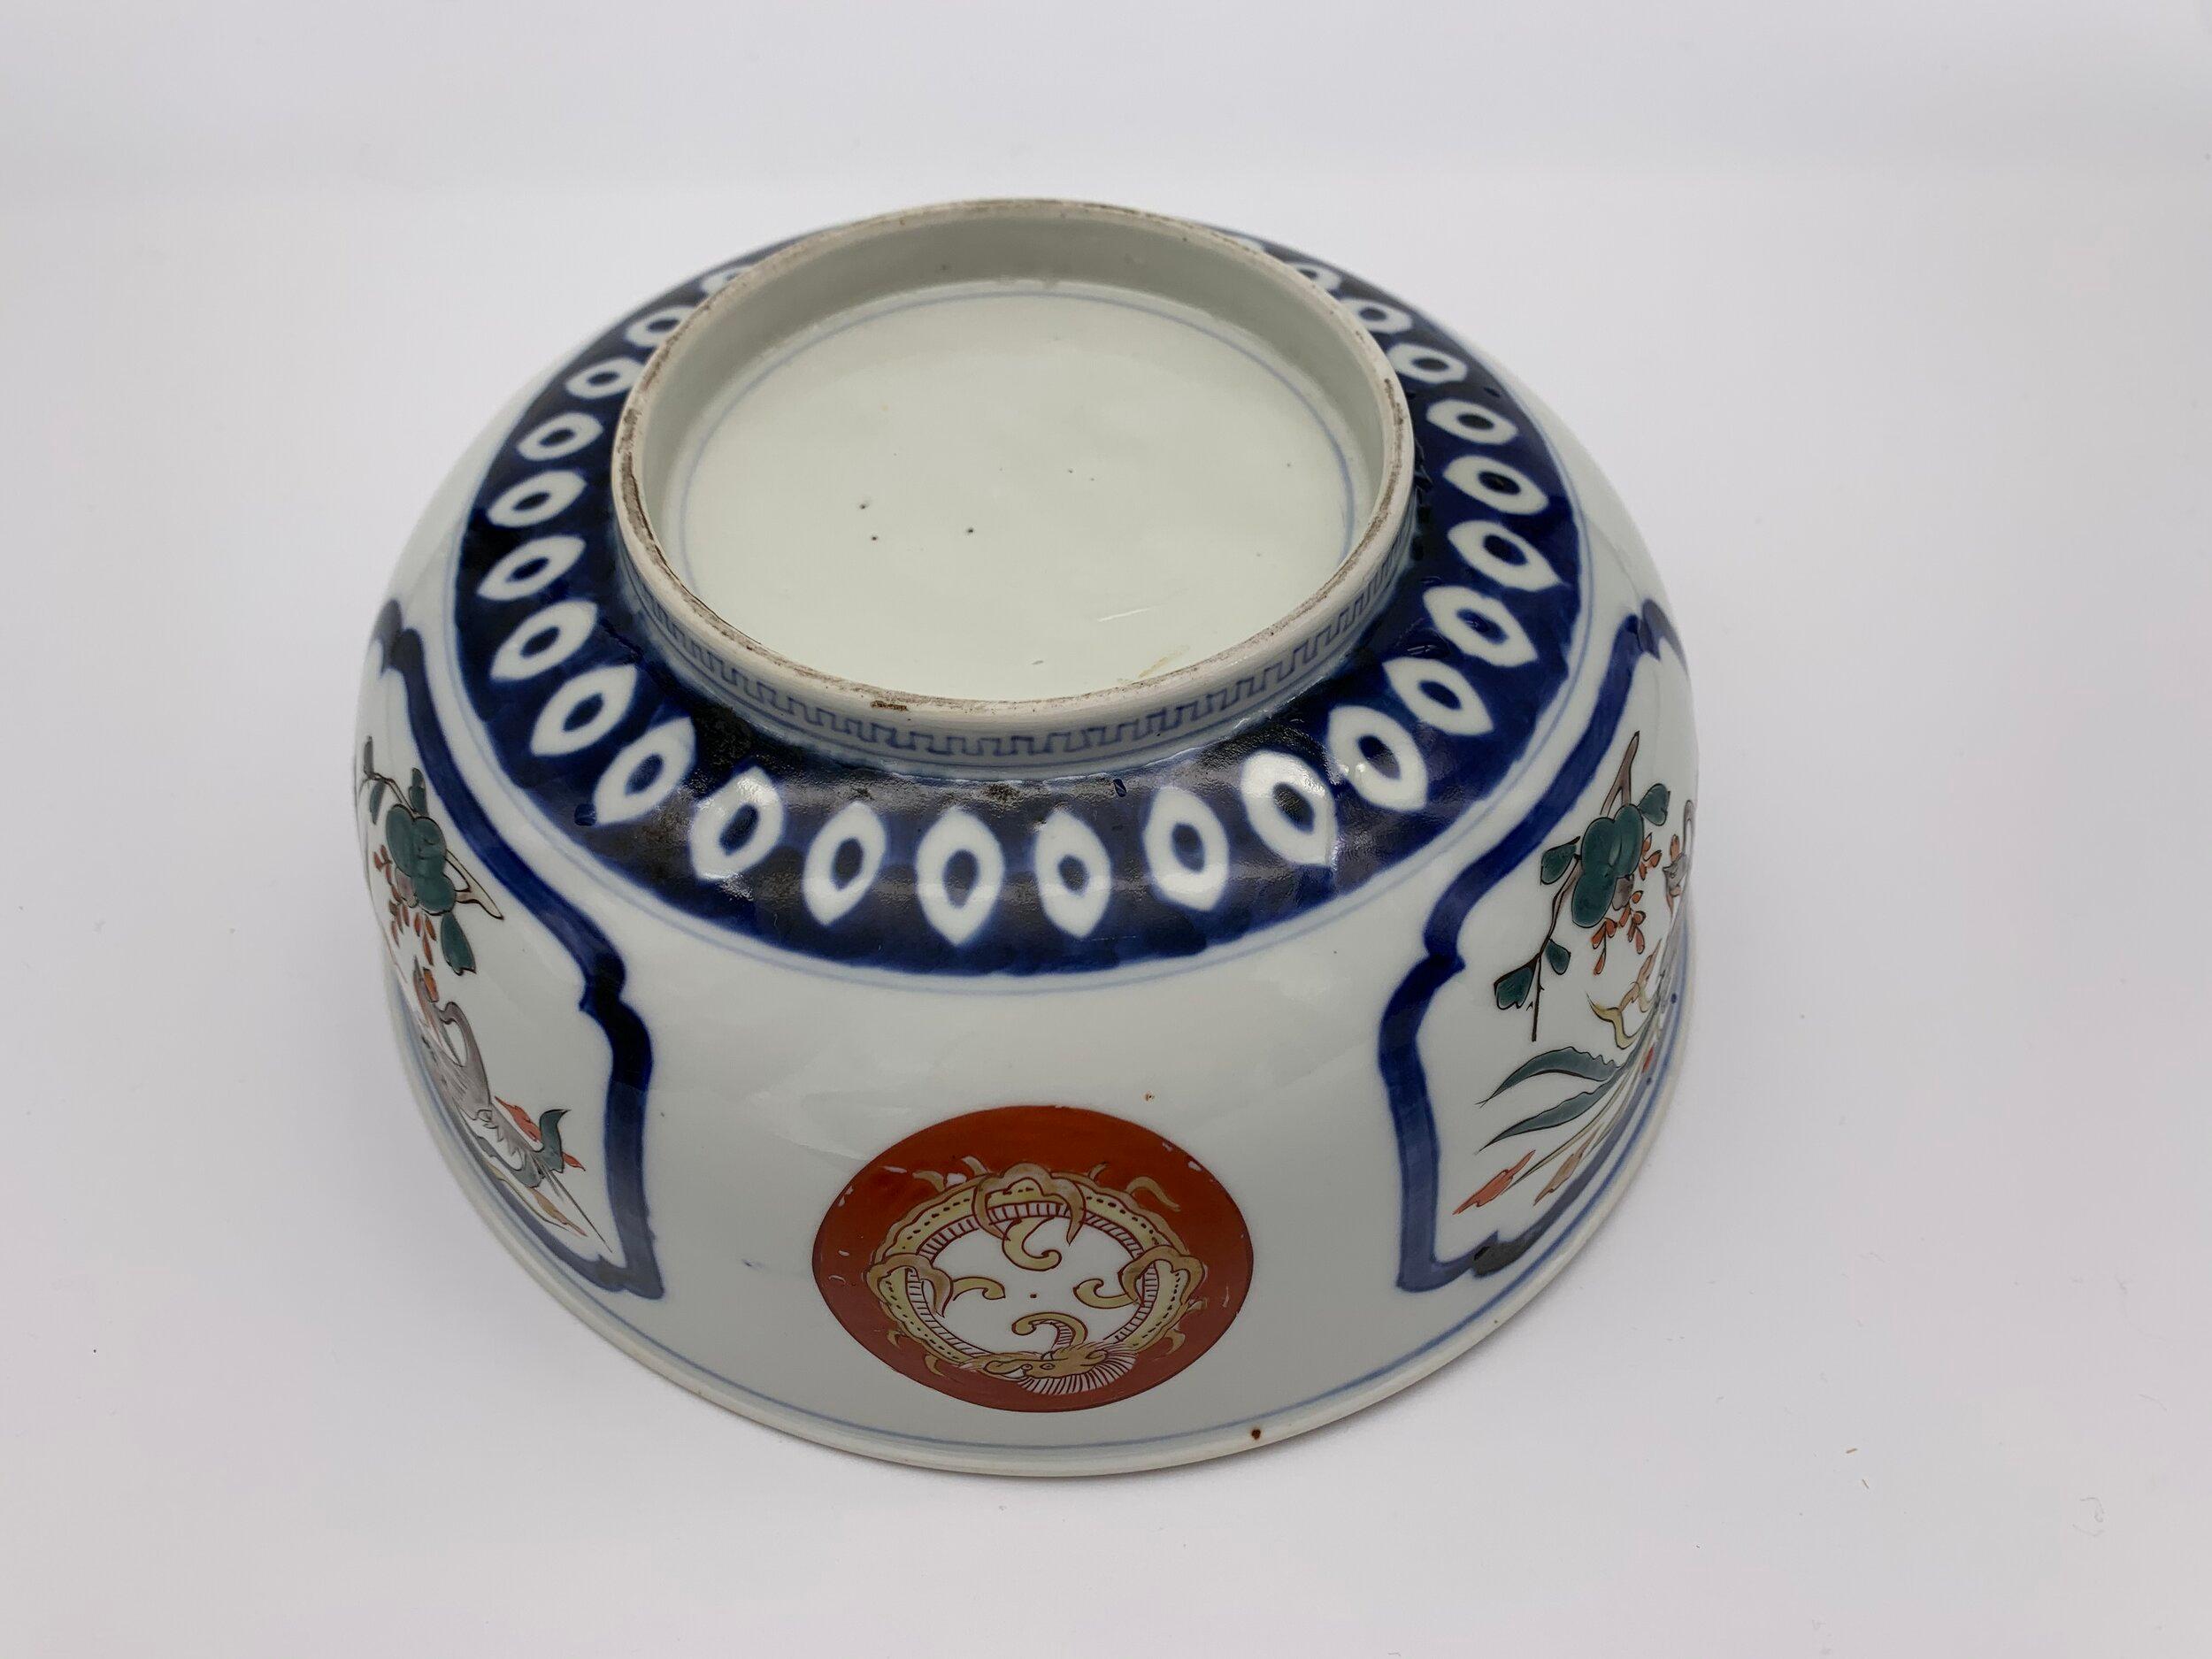 This is a porcelain serving bowl made in south of Japan.
It was made with style called Imari ware around 1900s in Meiji era.

Dimensions:
25 x 25 x H10 cm

Imari ware is a Western term for a brightly-coloured style of Arita ware Japanese export